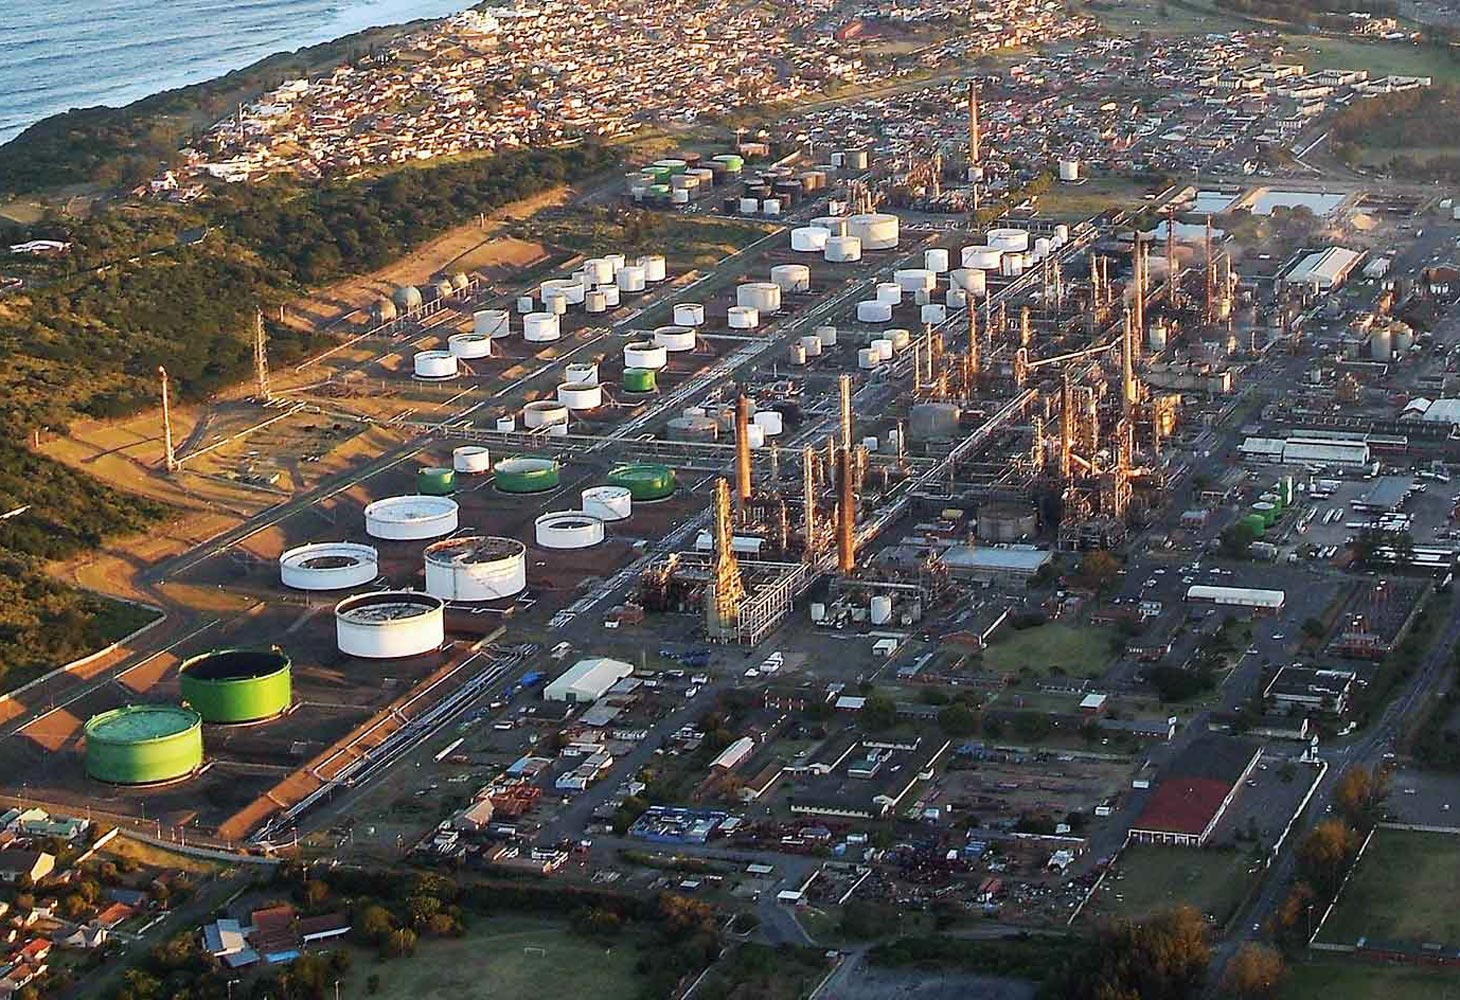 South Africa's Engen to re-purpose oil refinery to a terminal